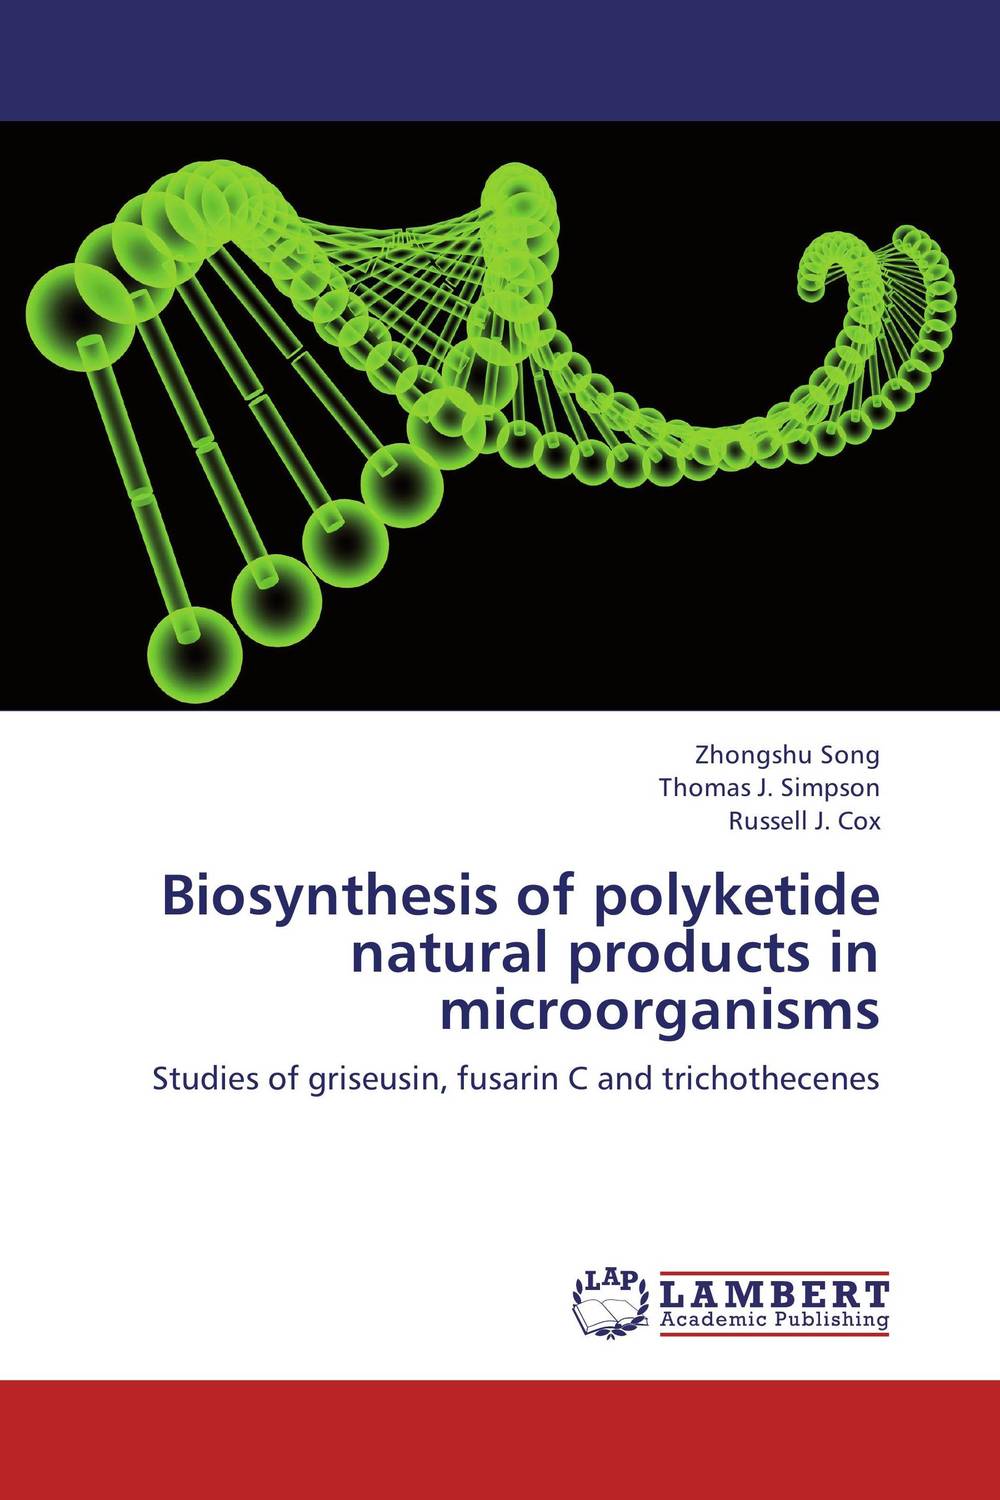 Biosynthesis of polyketide natural products in microorganisms